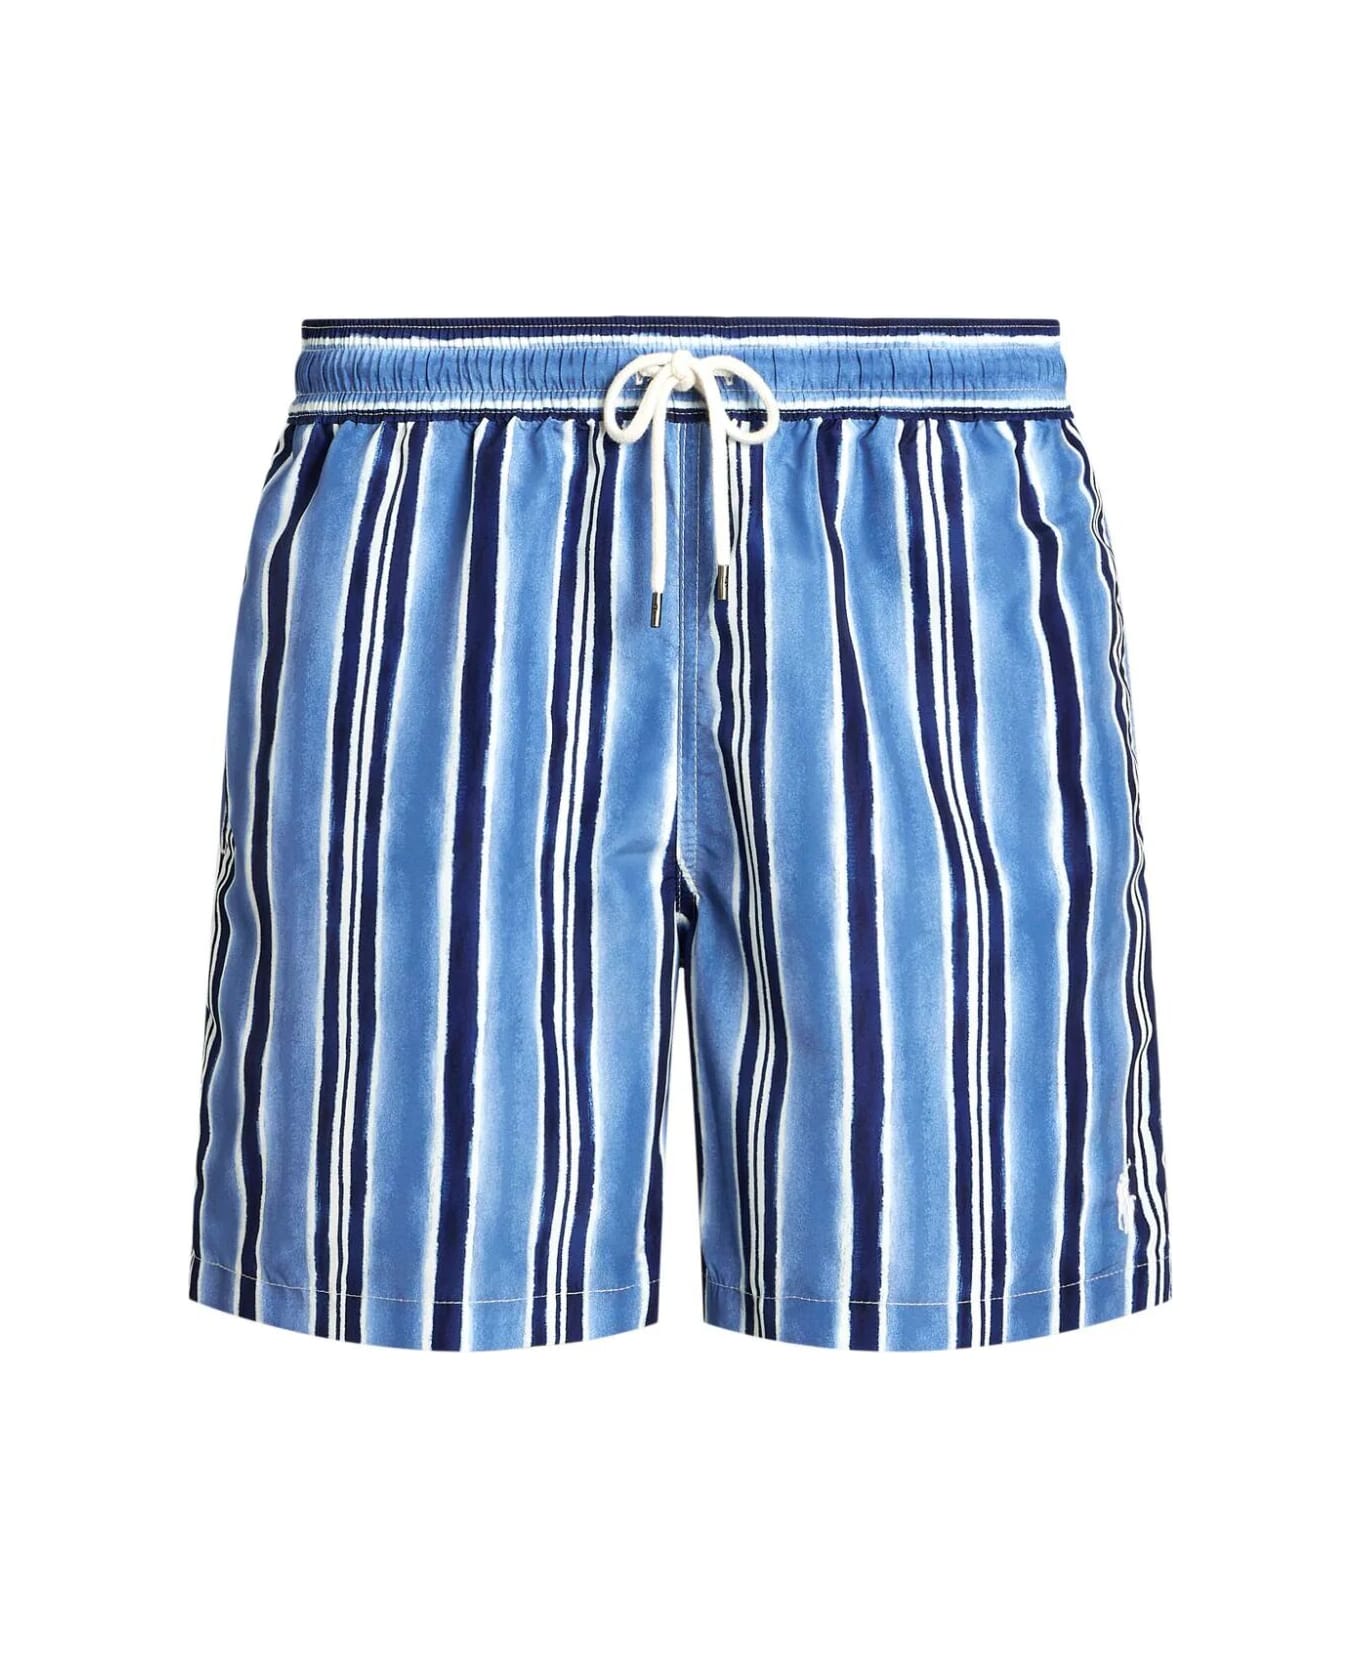 Polo Ralph Lauren Striped Swimshorts - Salt Washed Awning